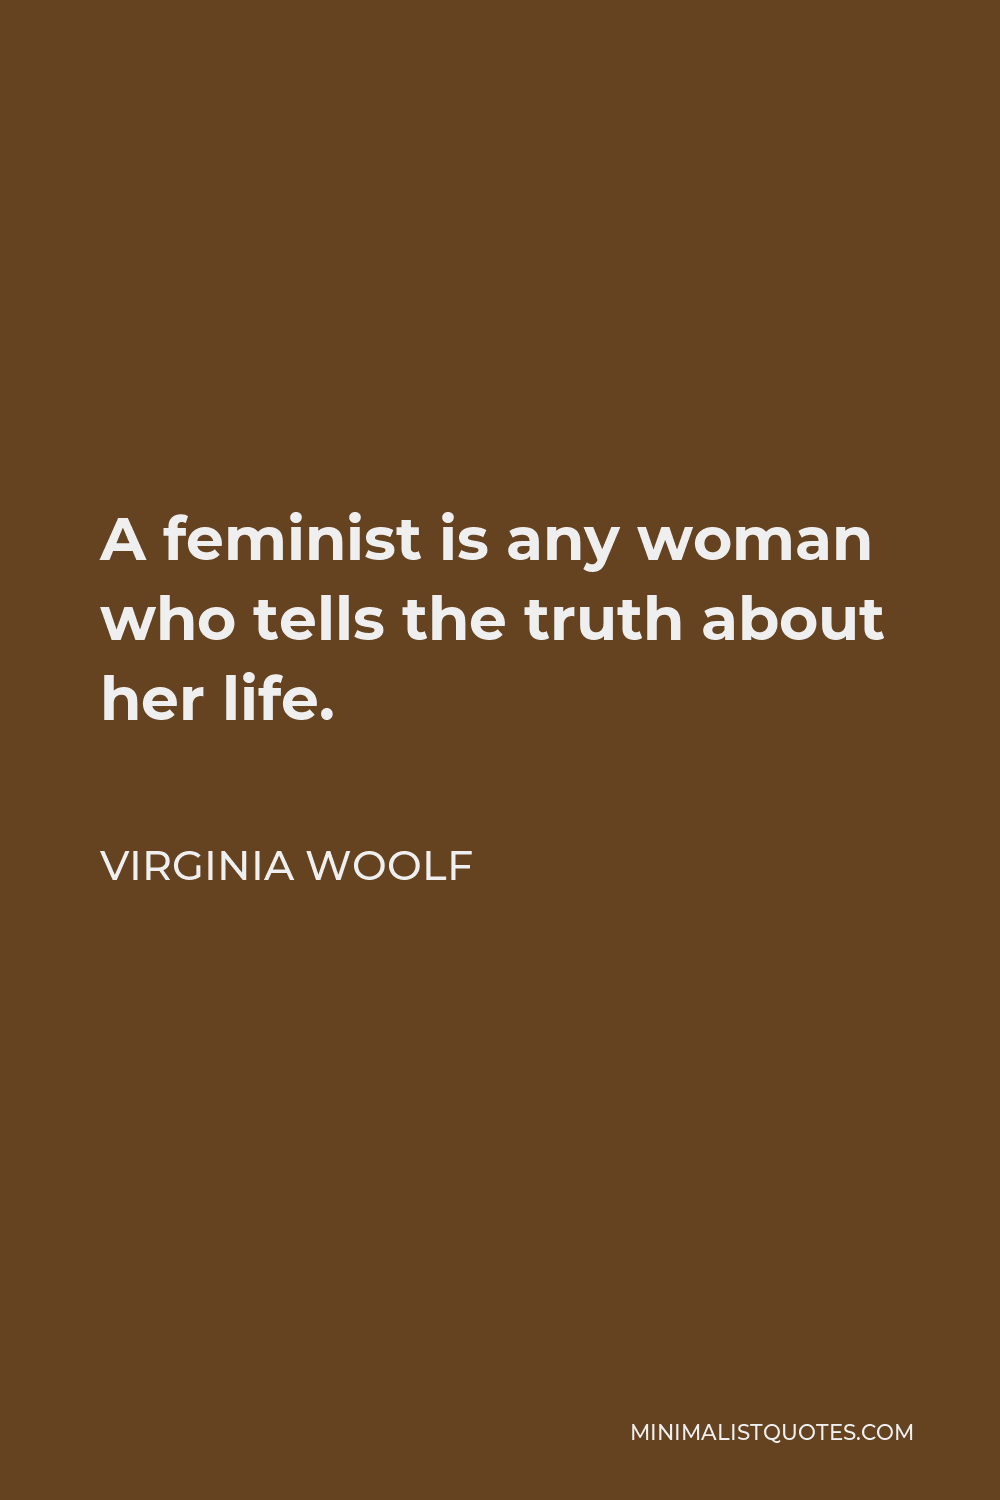 Virginia Woolf Quote - A feminist is any woman who tells the truth about her life.